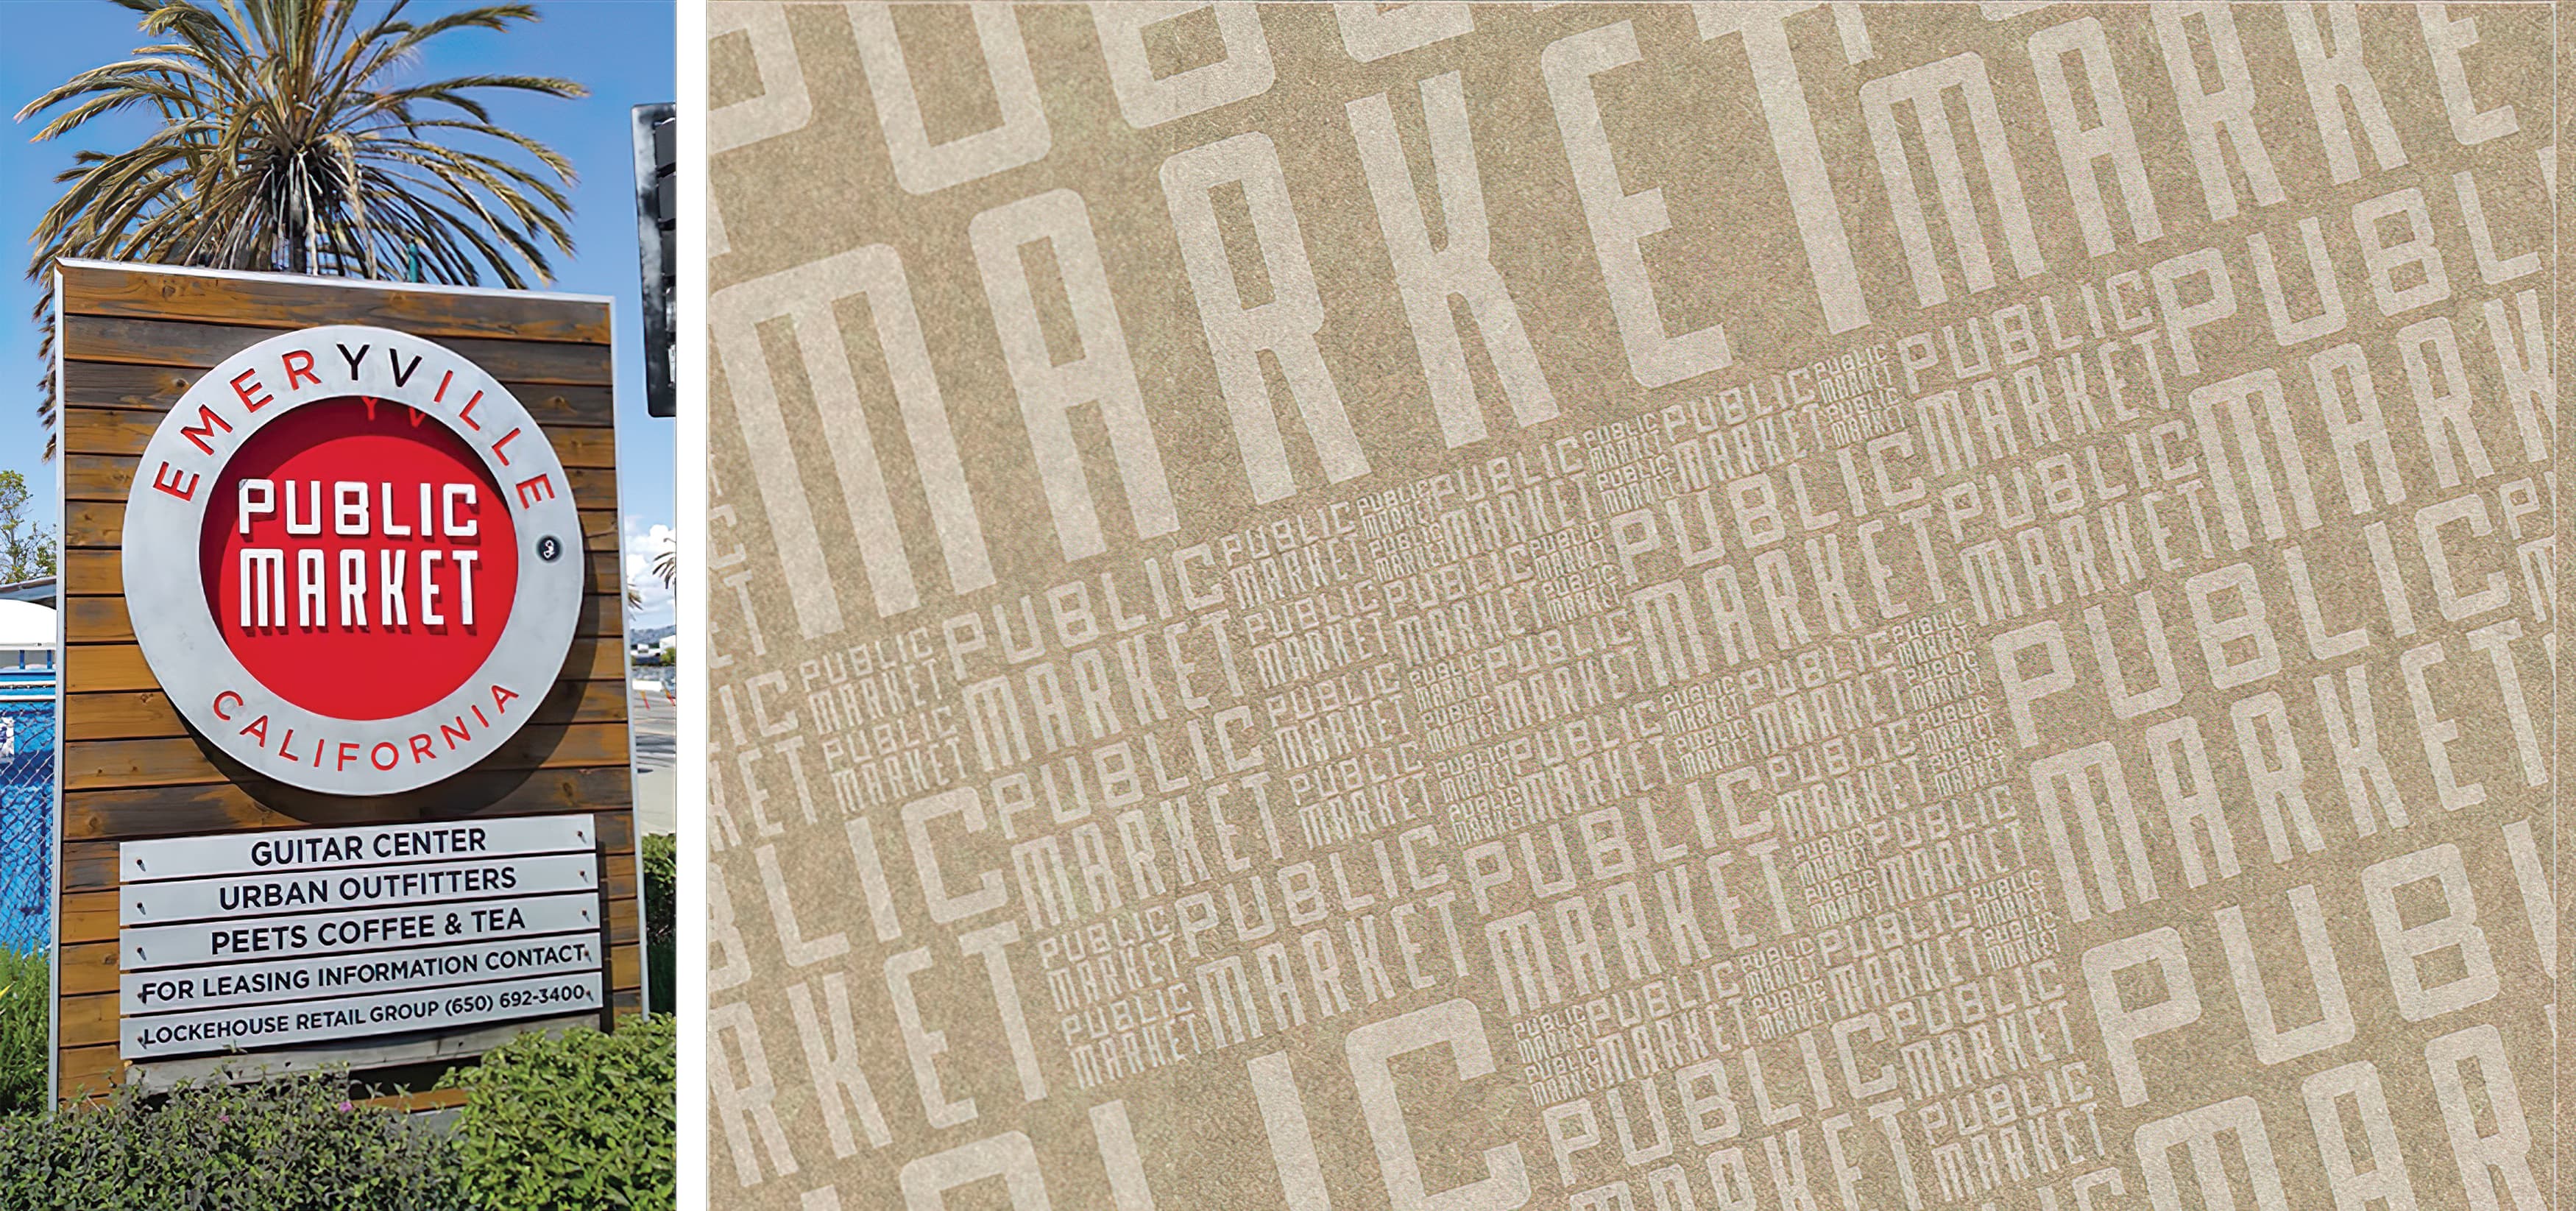 RSM Design worked with TMG Partners to develop signage and wayfinding program for Public Market, a dining and shopping center in San Francisco, California. Project Identity Signage.